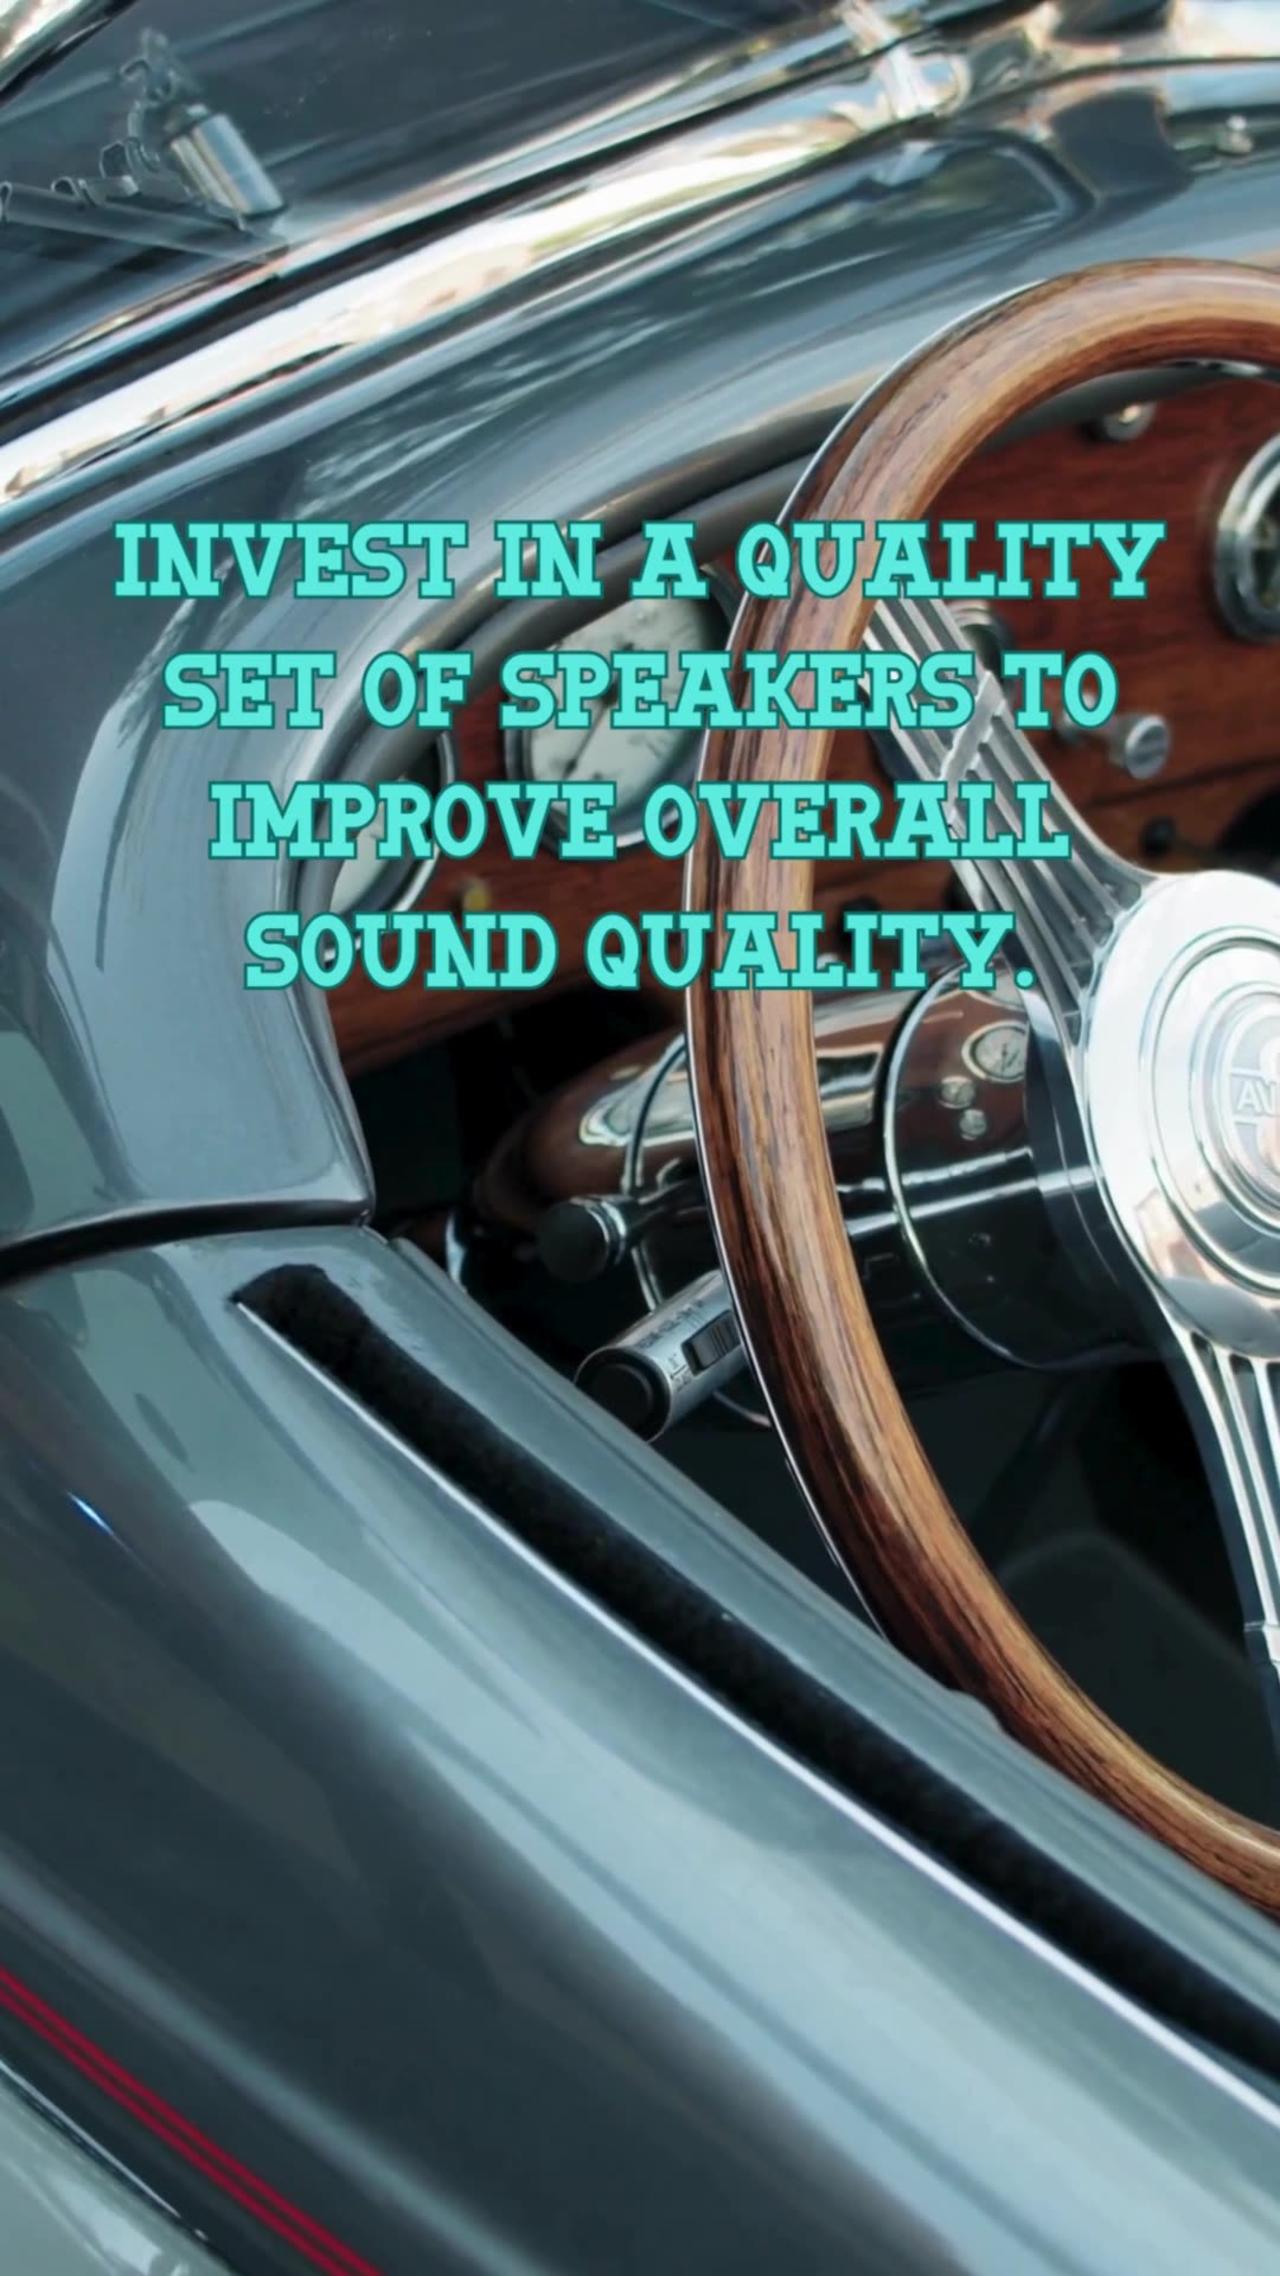 Invest in a quality set of speakers to improve overall sound quality